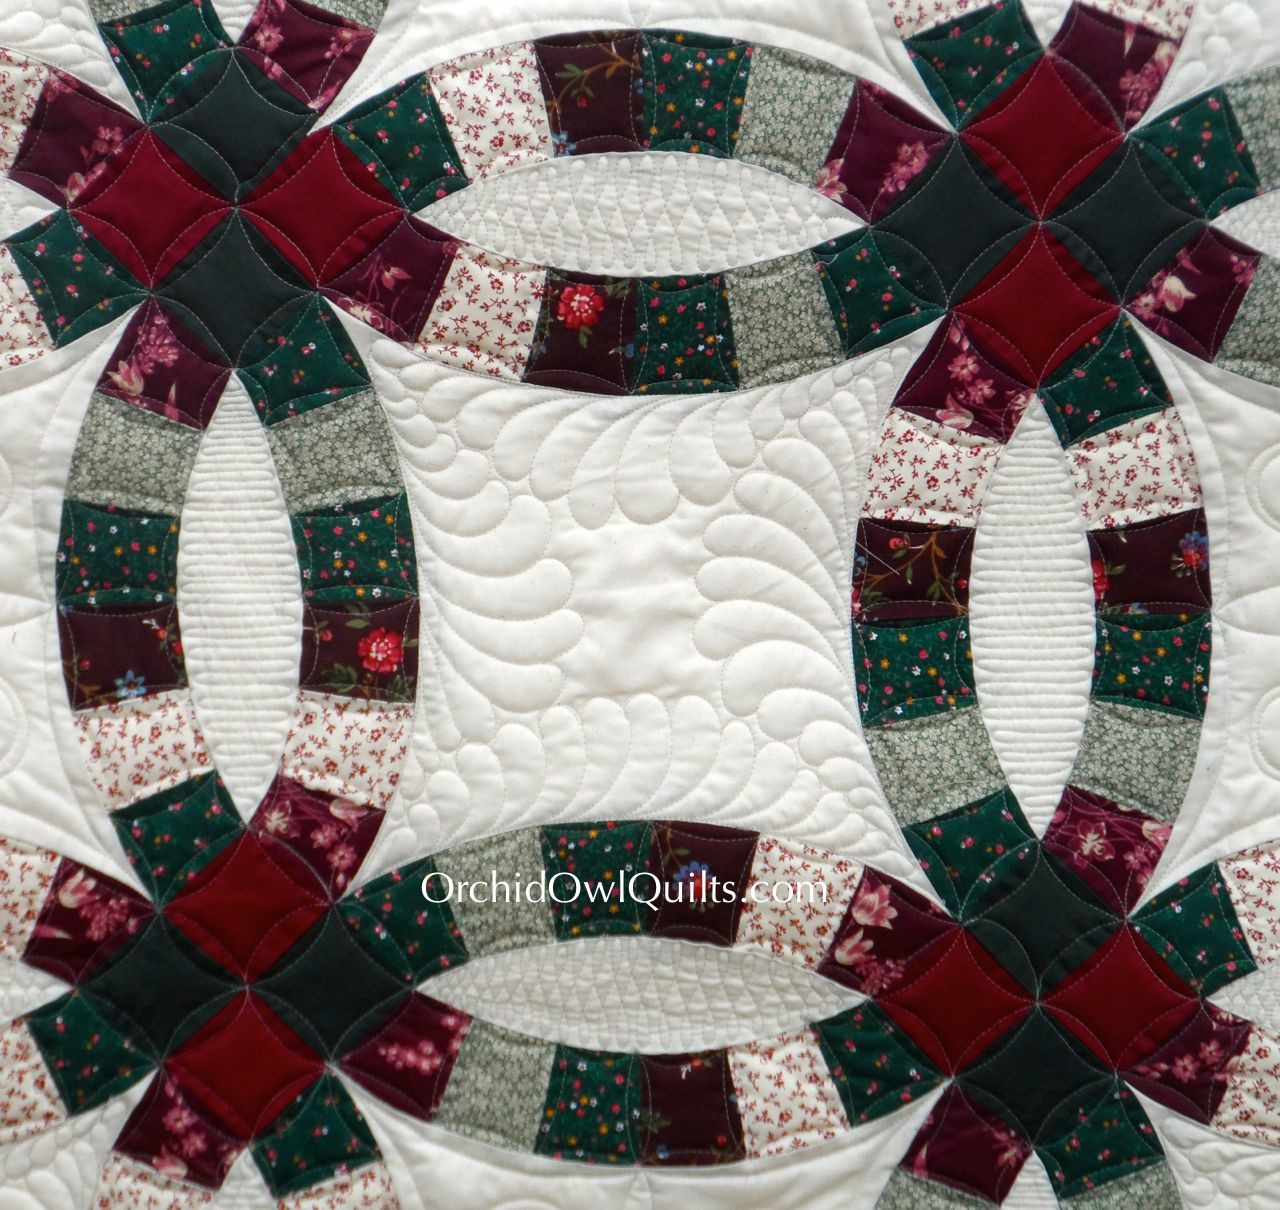 Wedding Ring Quilt
 Double Wedding Ring Quilt Orchid Owl Quilts